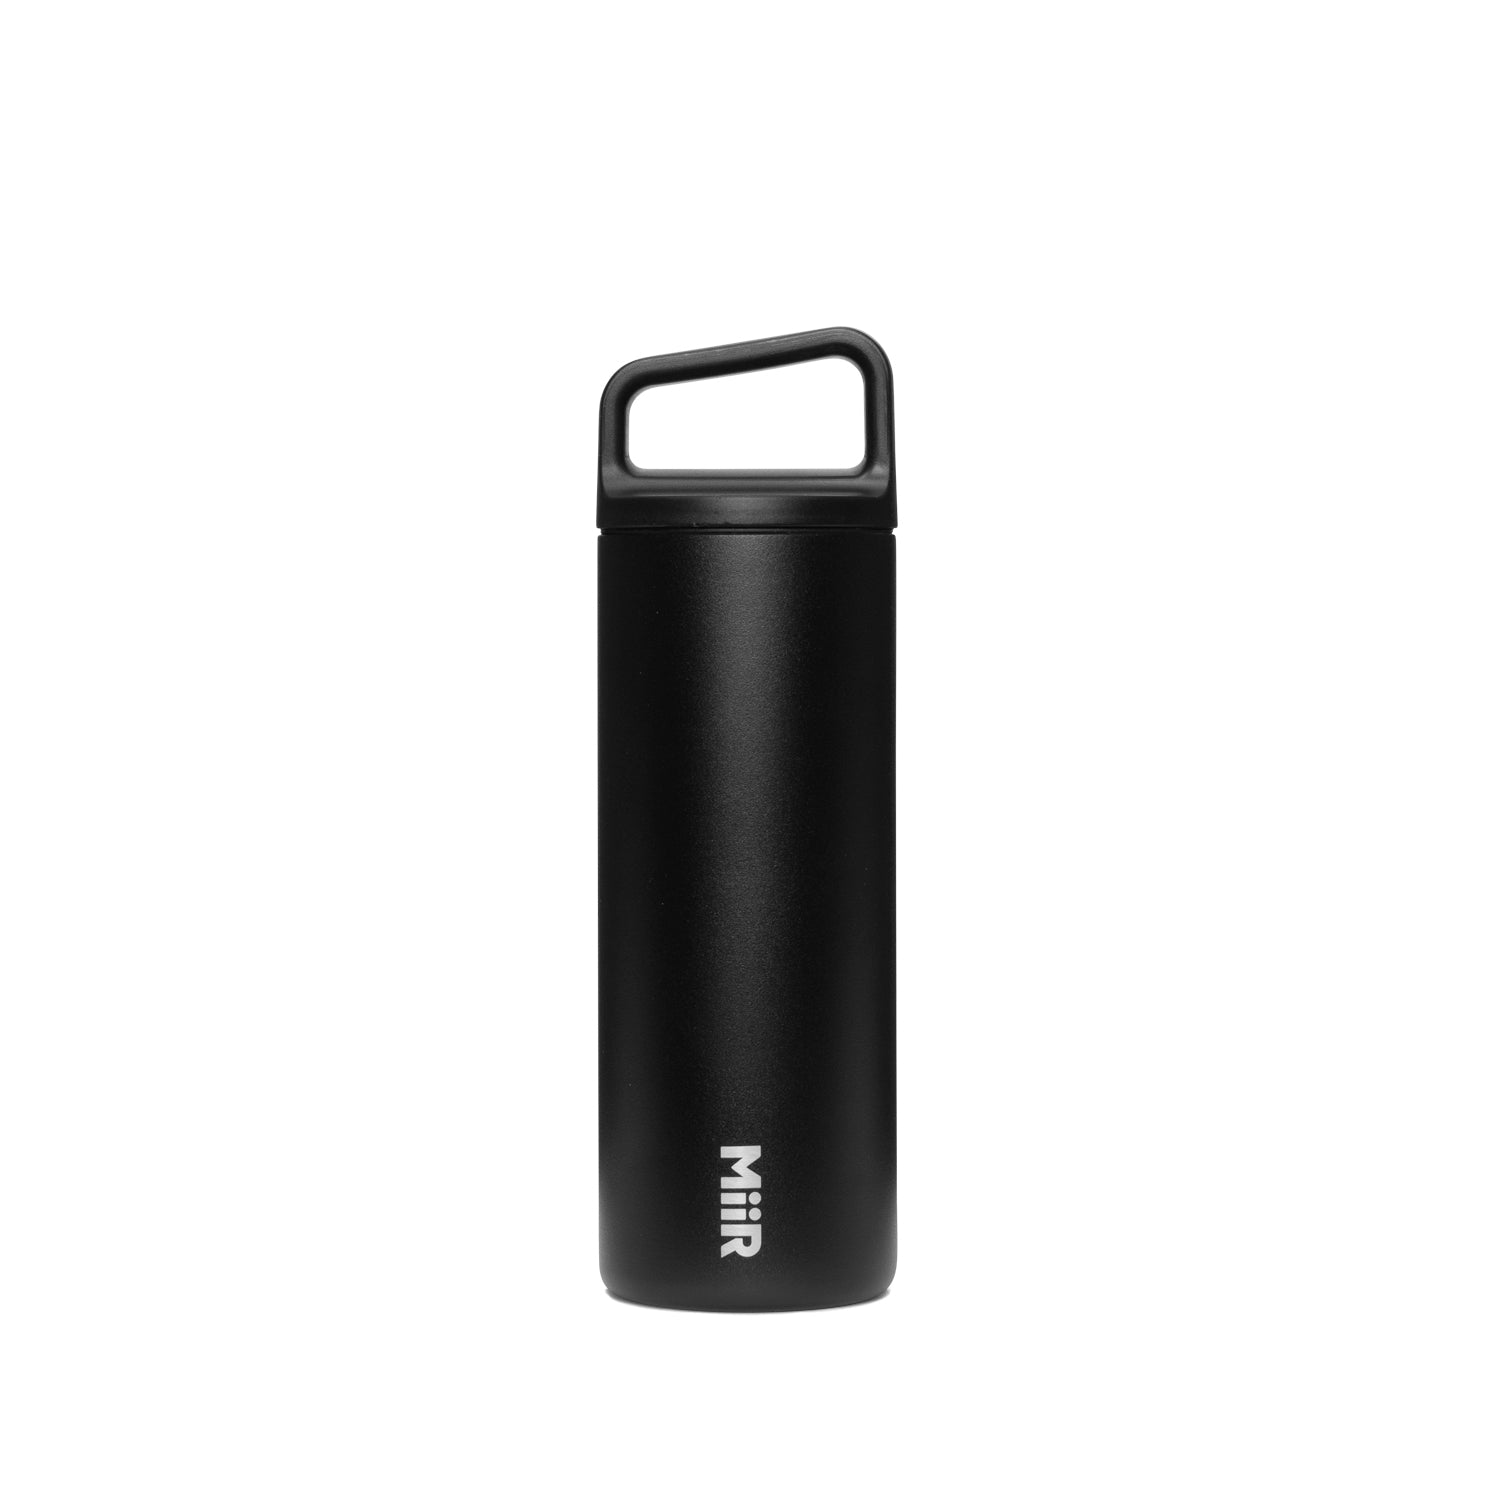 Air Up water bottle - The best products with free shipping